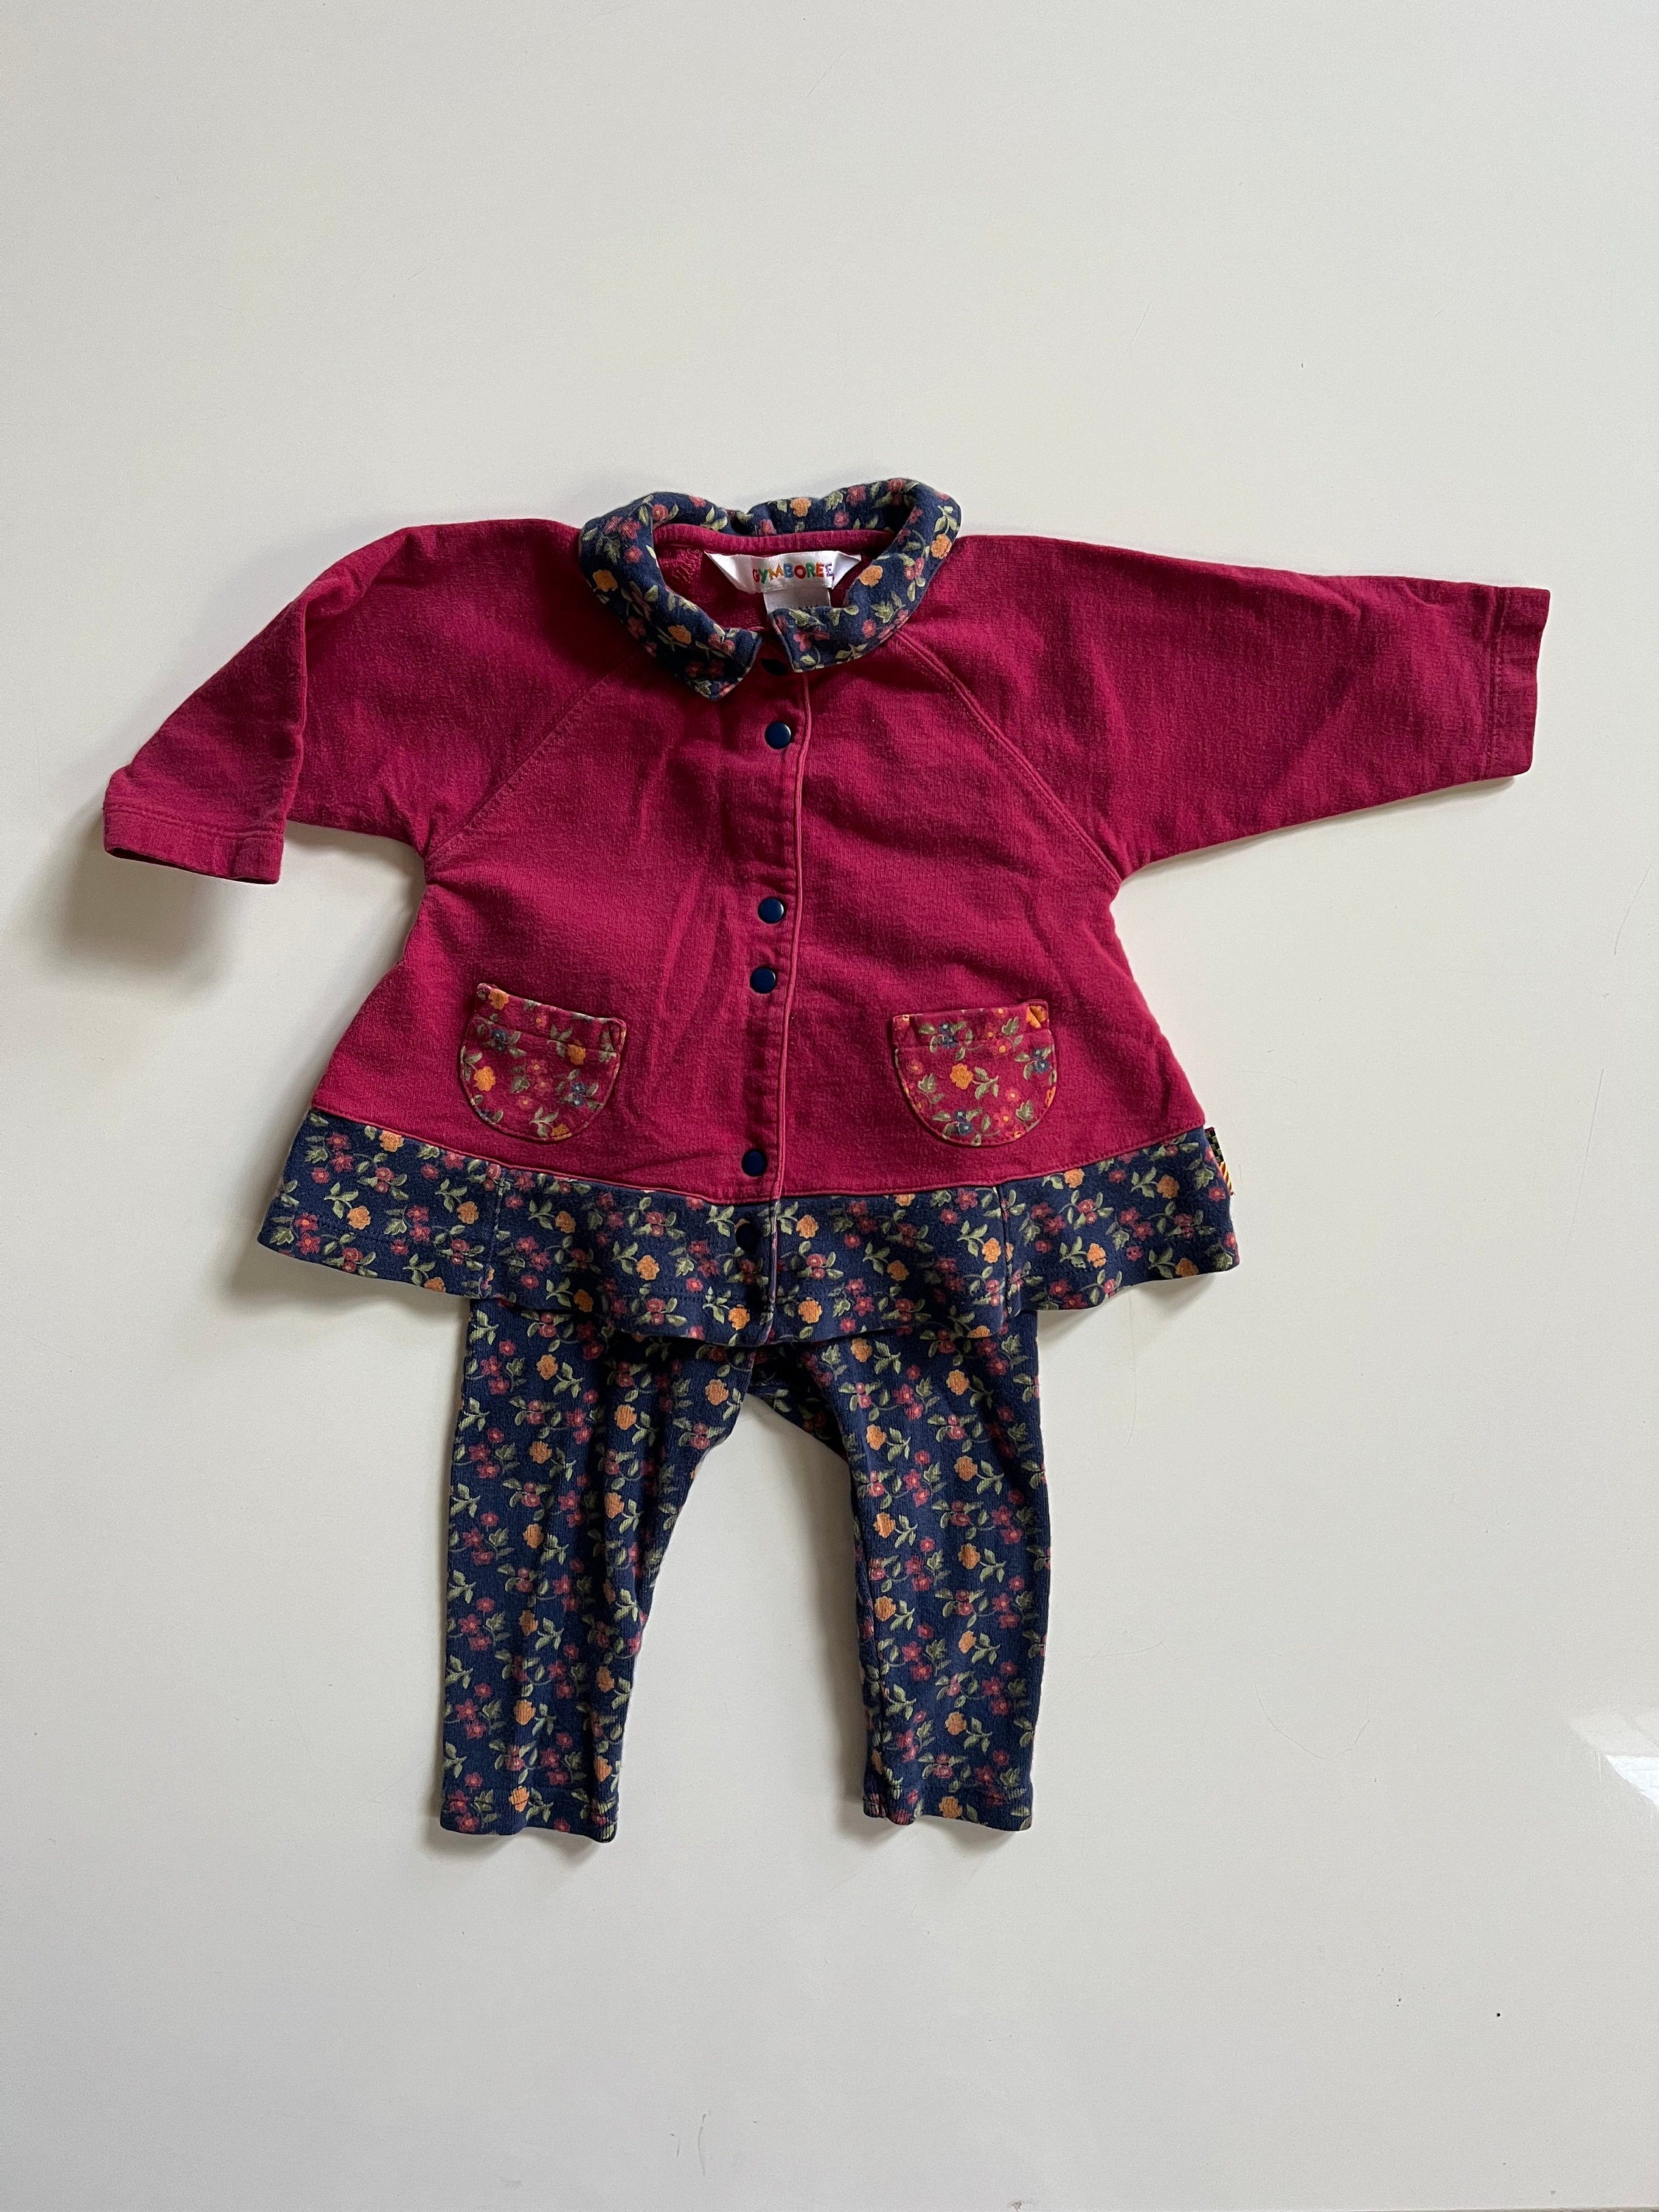 Vintage Gymboree Lounge Set Baby Girl All Cotton in Burgundy and Navy Blue  Leggings and Long Sleeve Shirt Orange and Pink Roses Winter Baby 